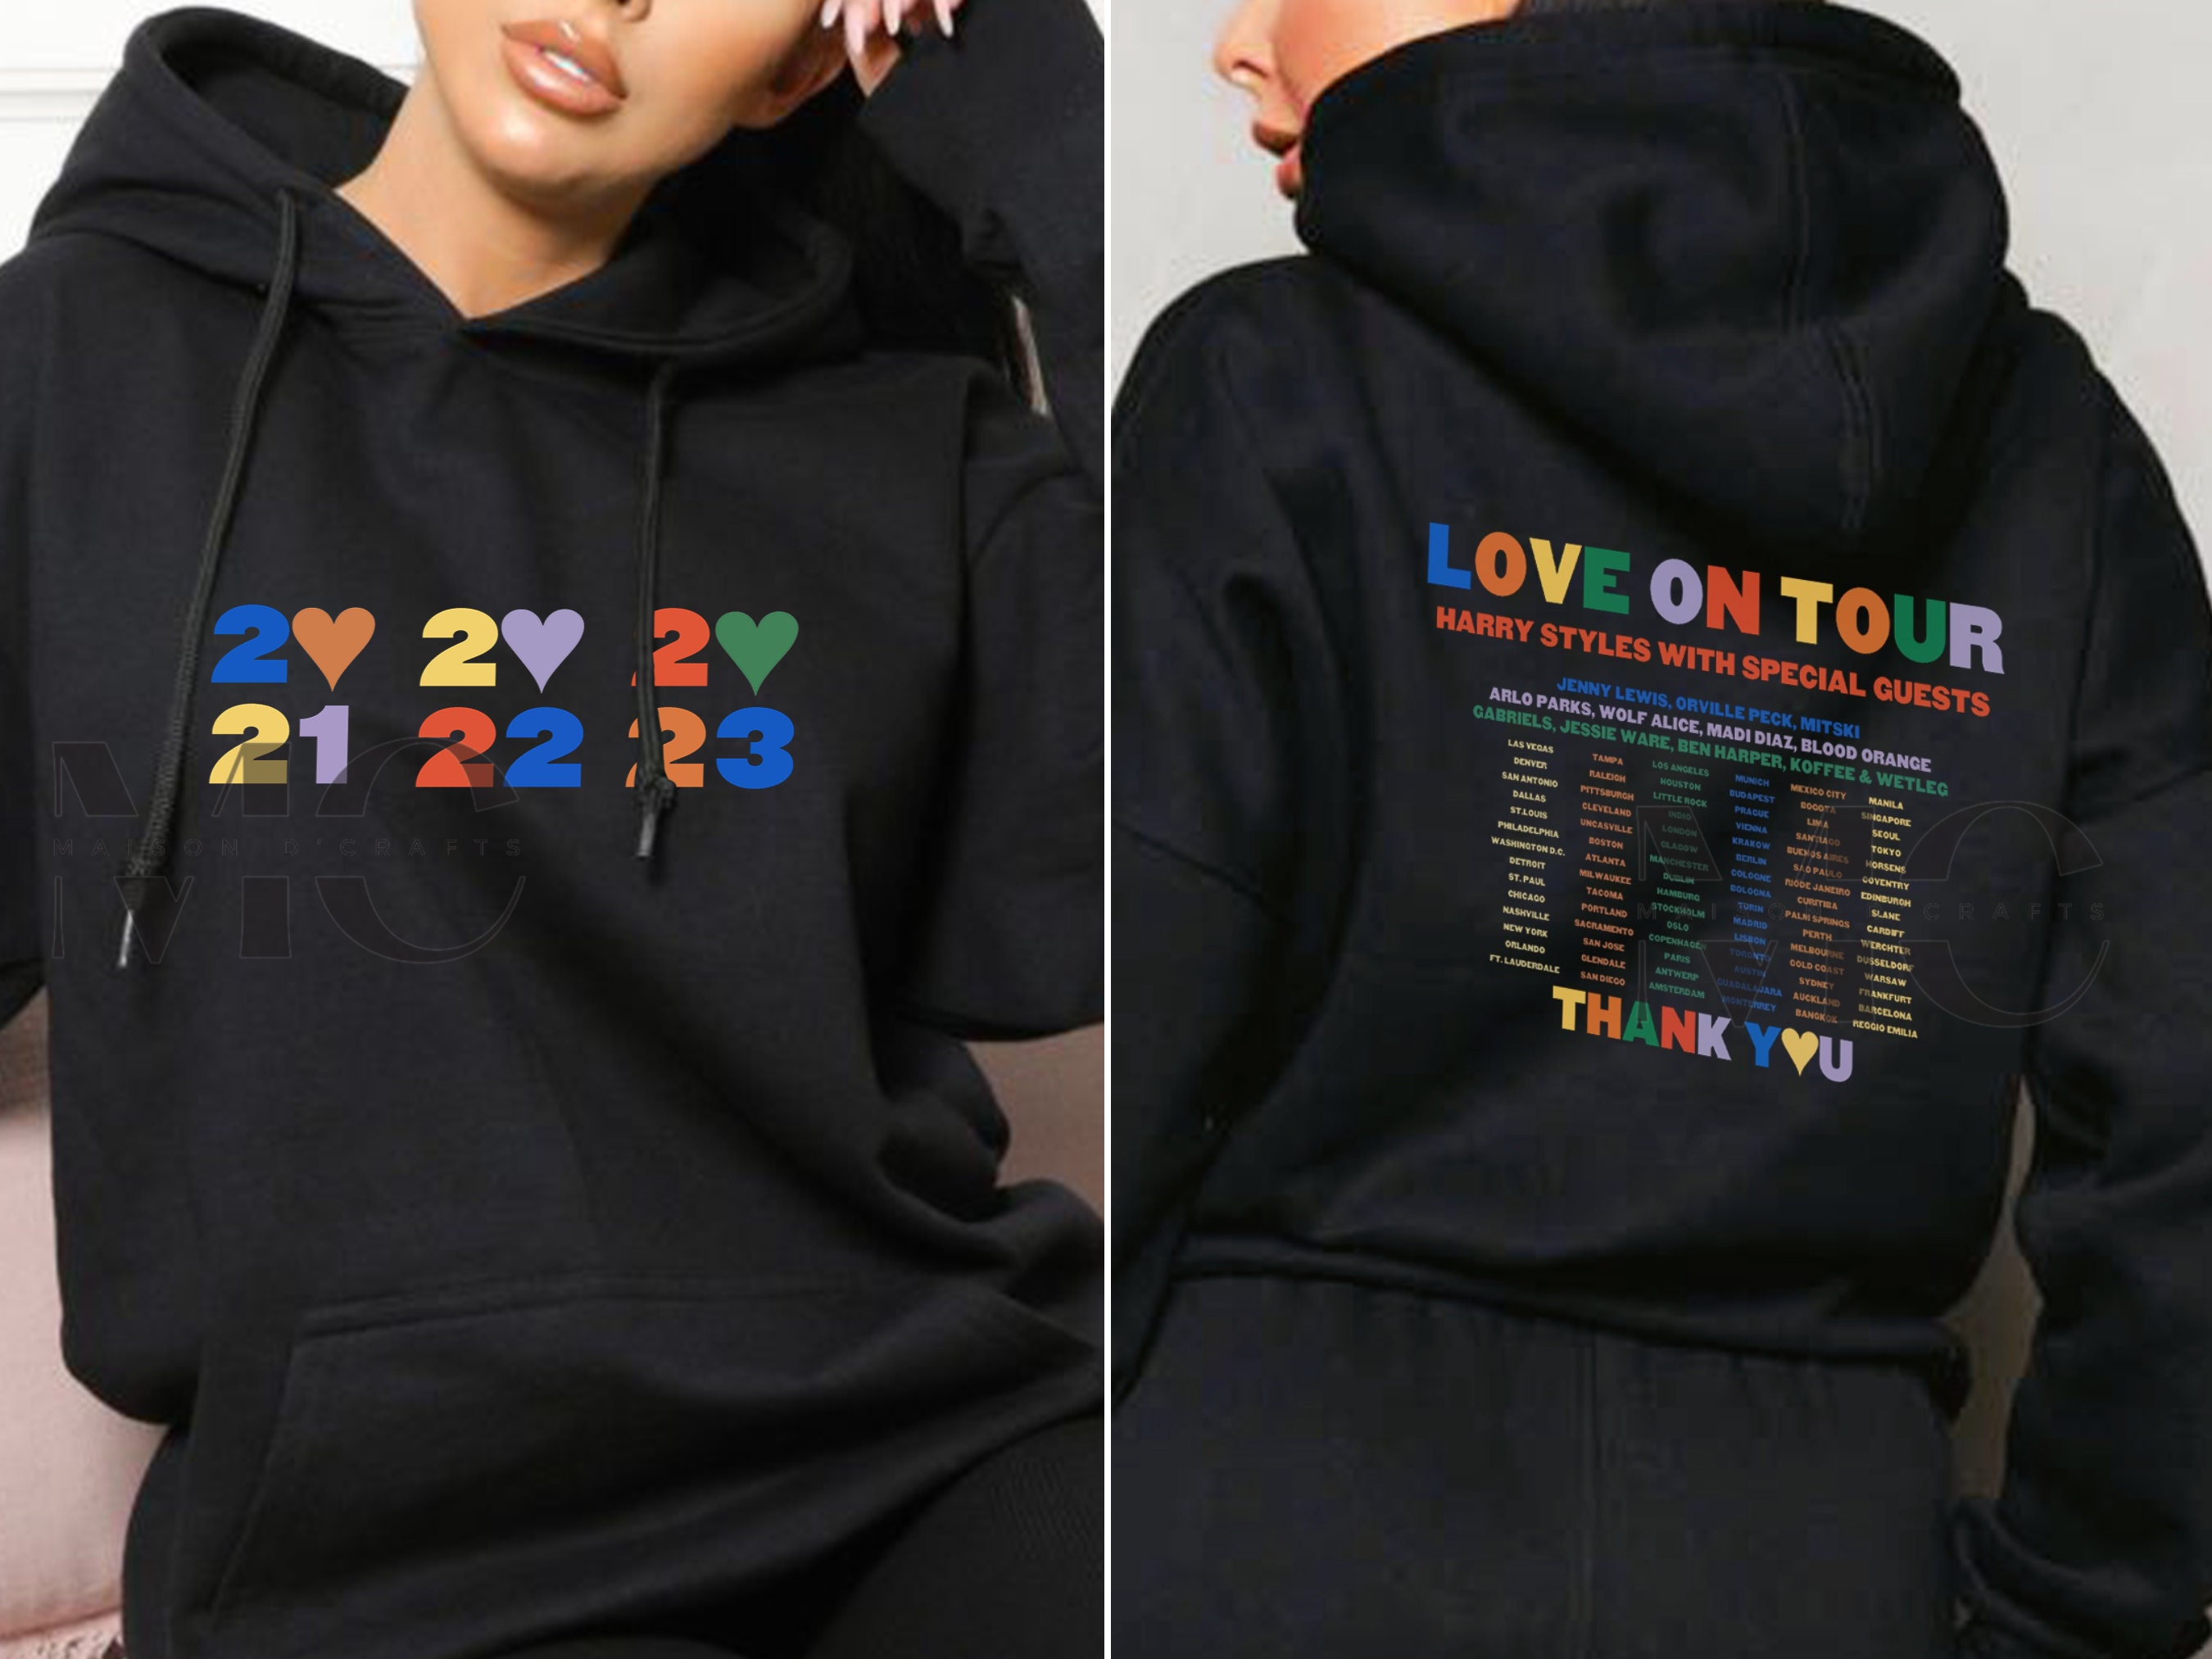 Harry Styles Love on Tour Hoodie Harry Styles Merch Thank You Hoodie HSLOT Harry  Styles Gifts Love on Tour Merch Harry Styles Fan Hoodie 